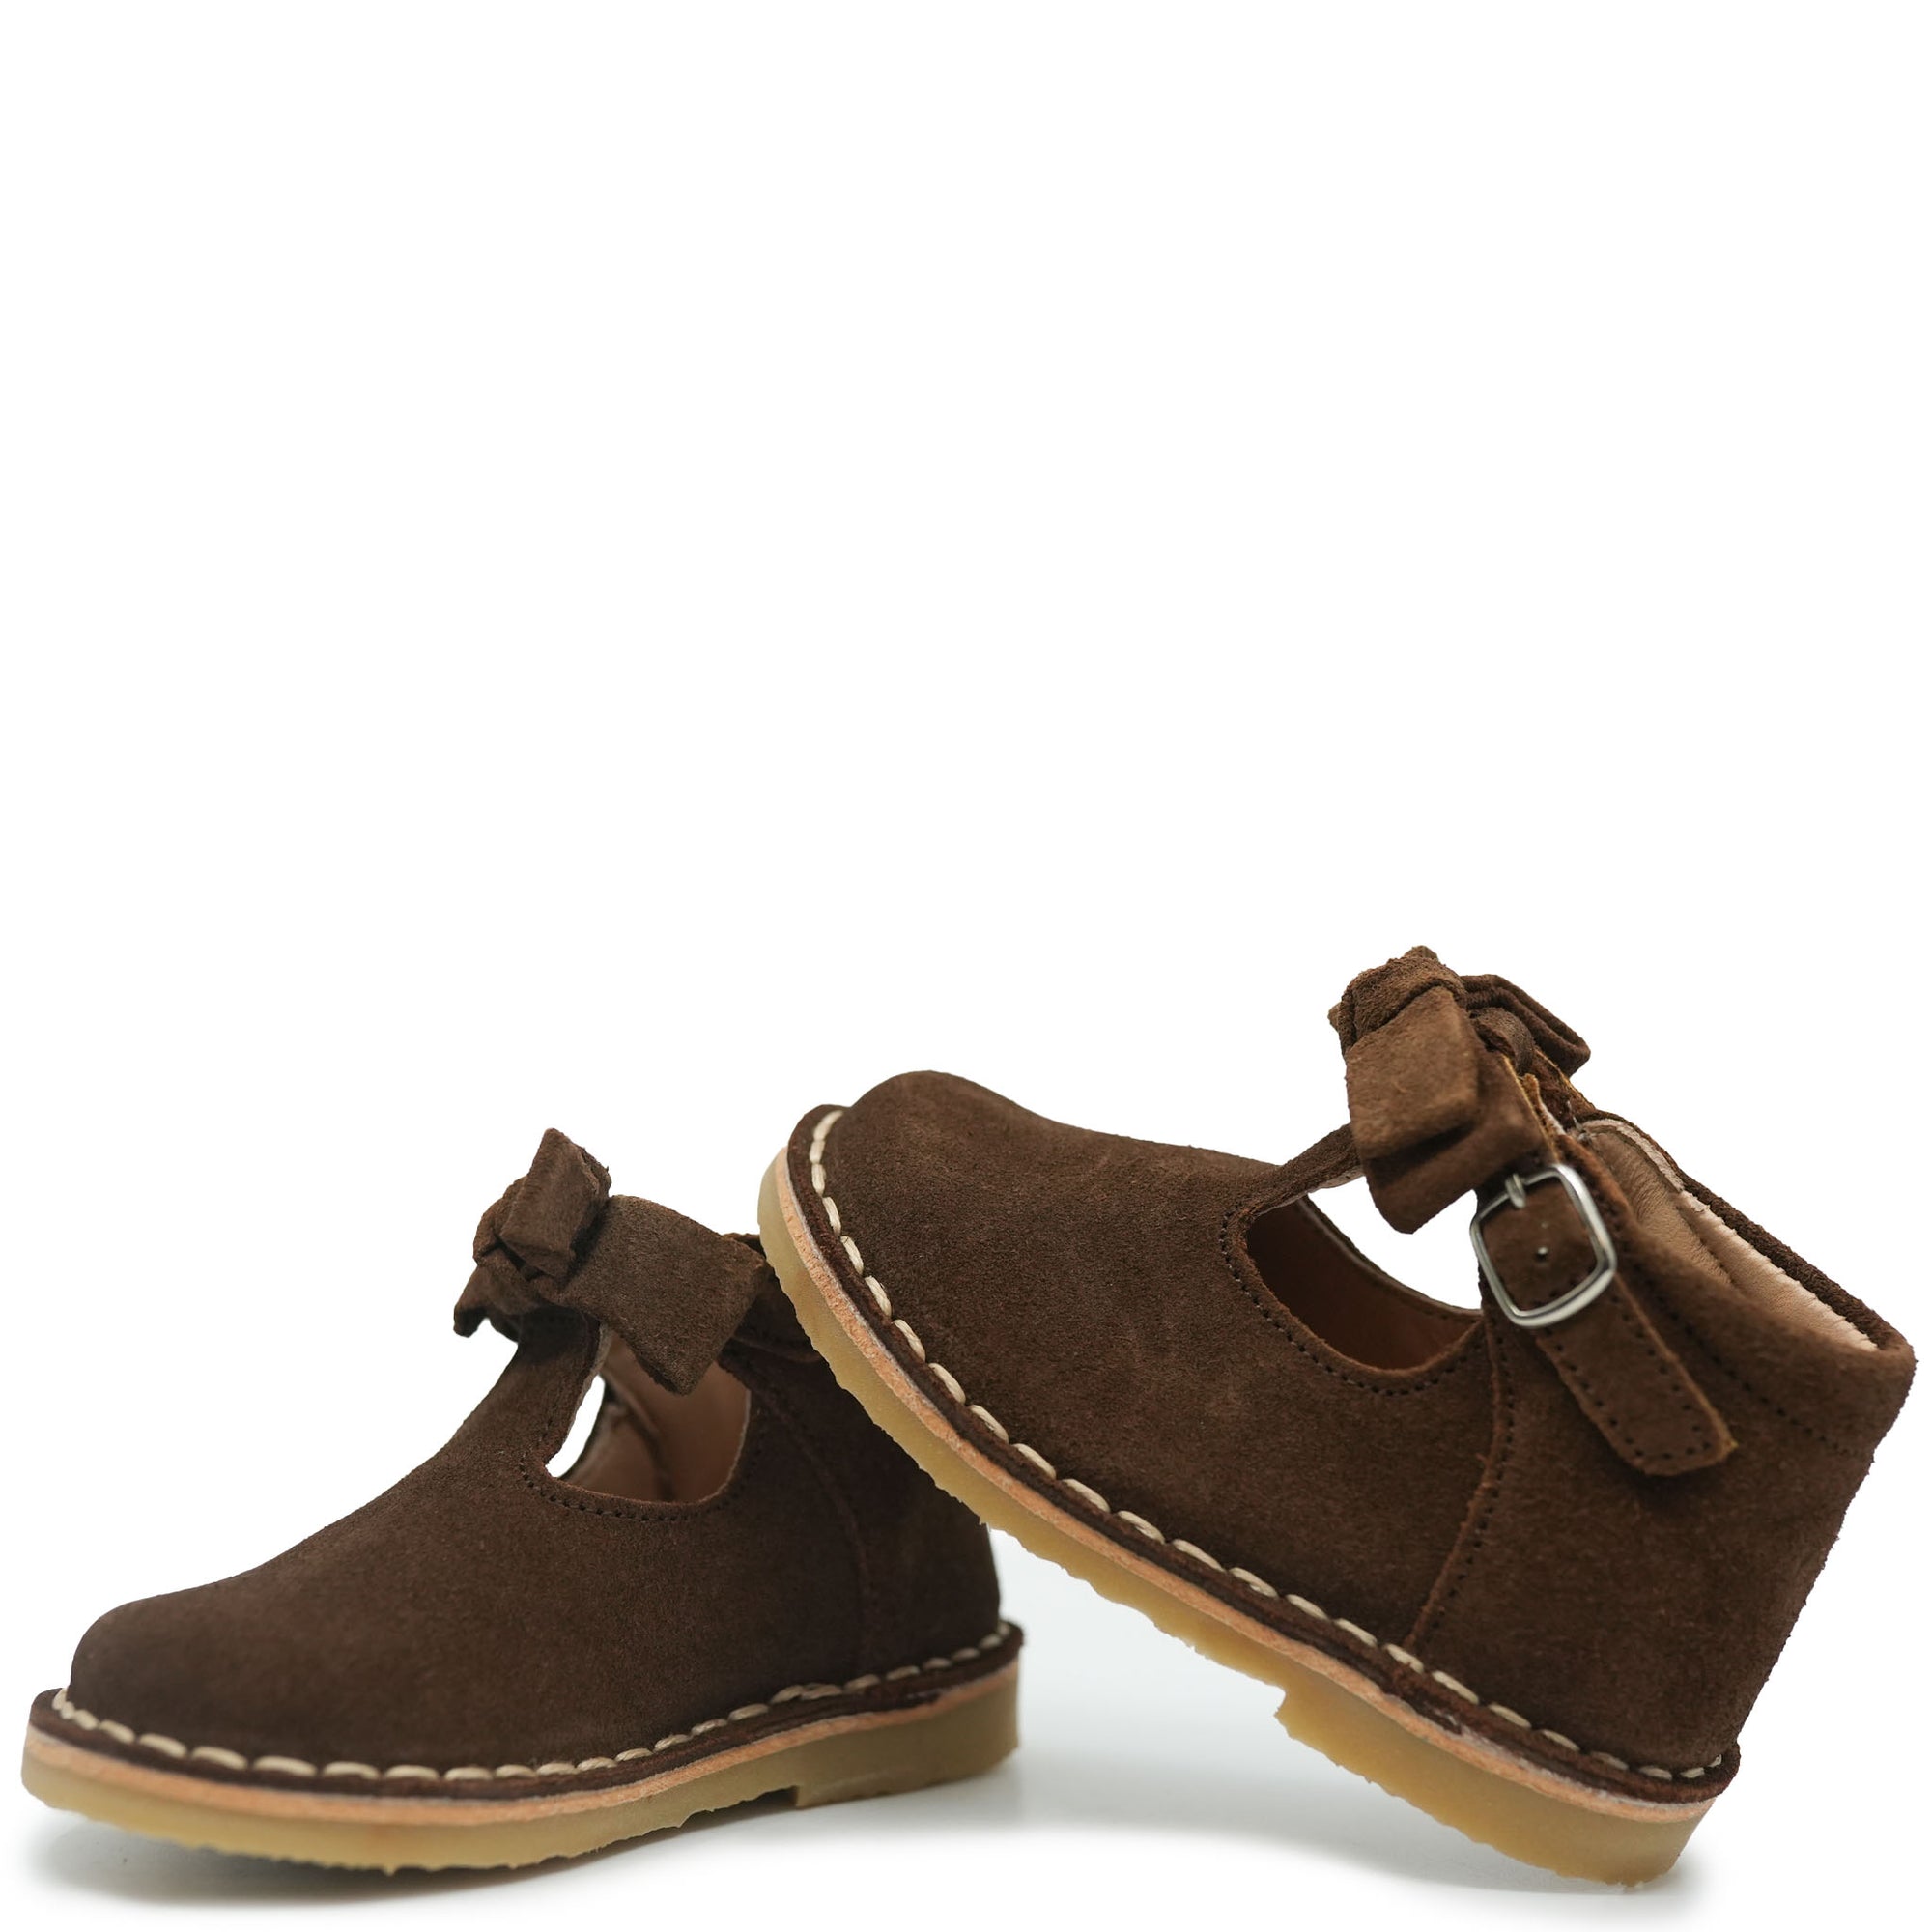 Petit Nord Teddy Bow T Strap Baby Shoe-Tassel Children Shoes